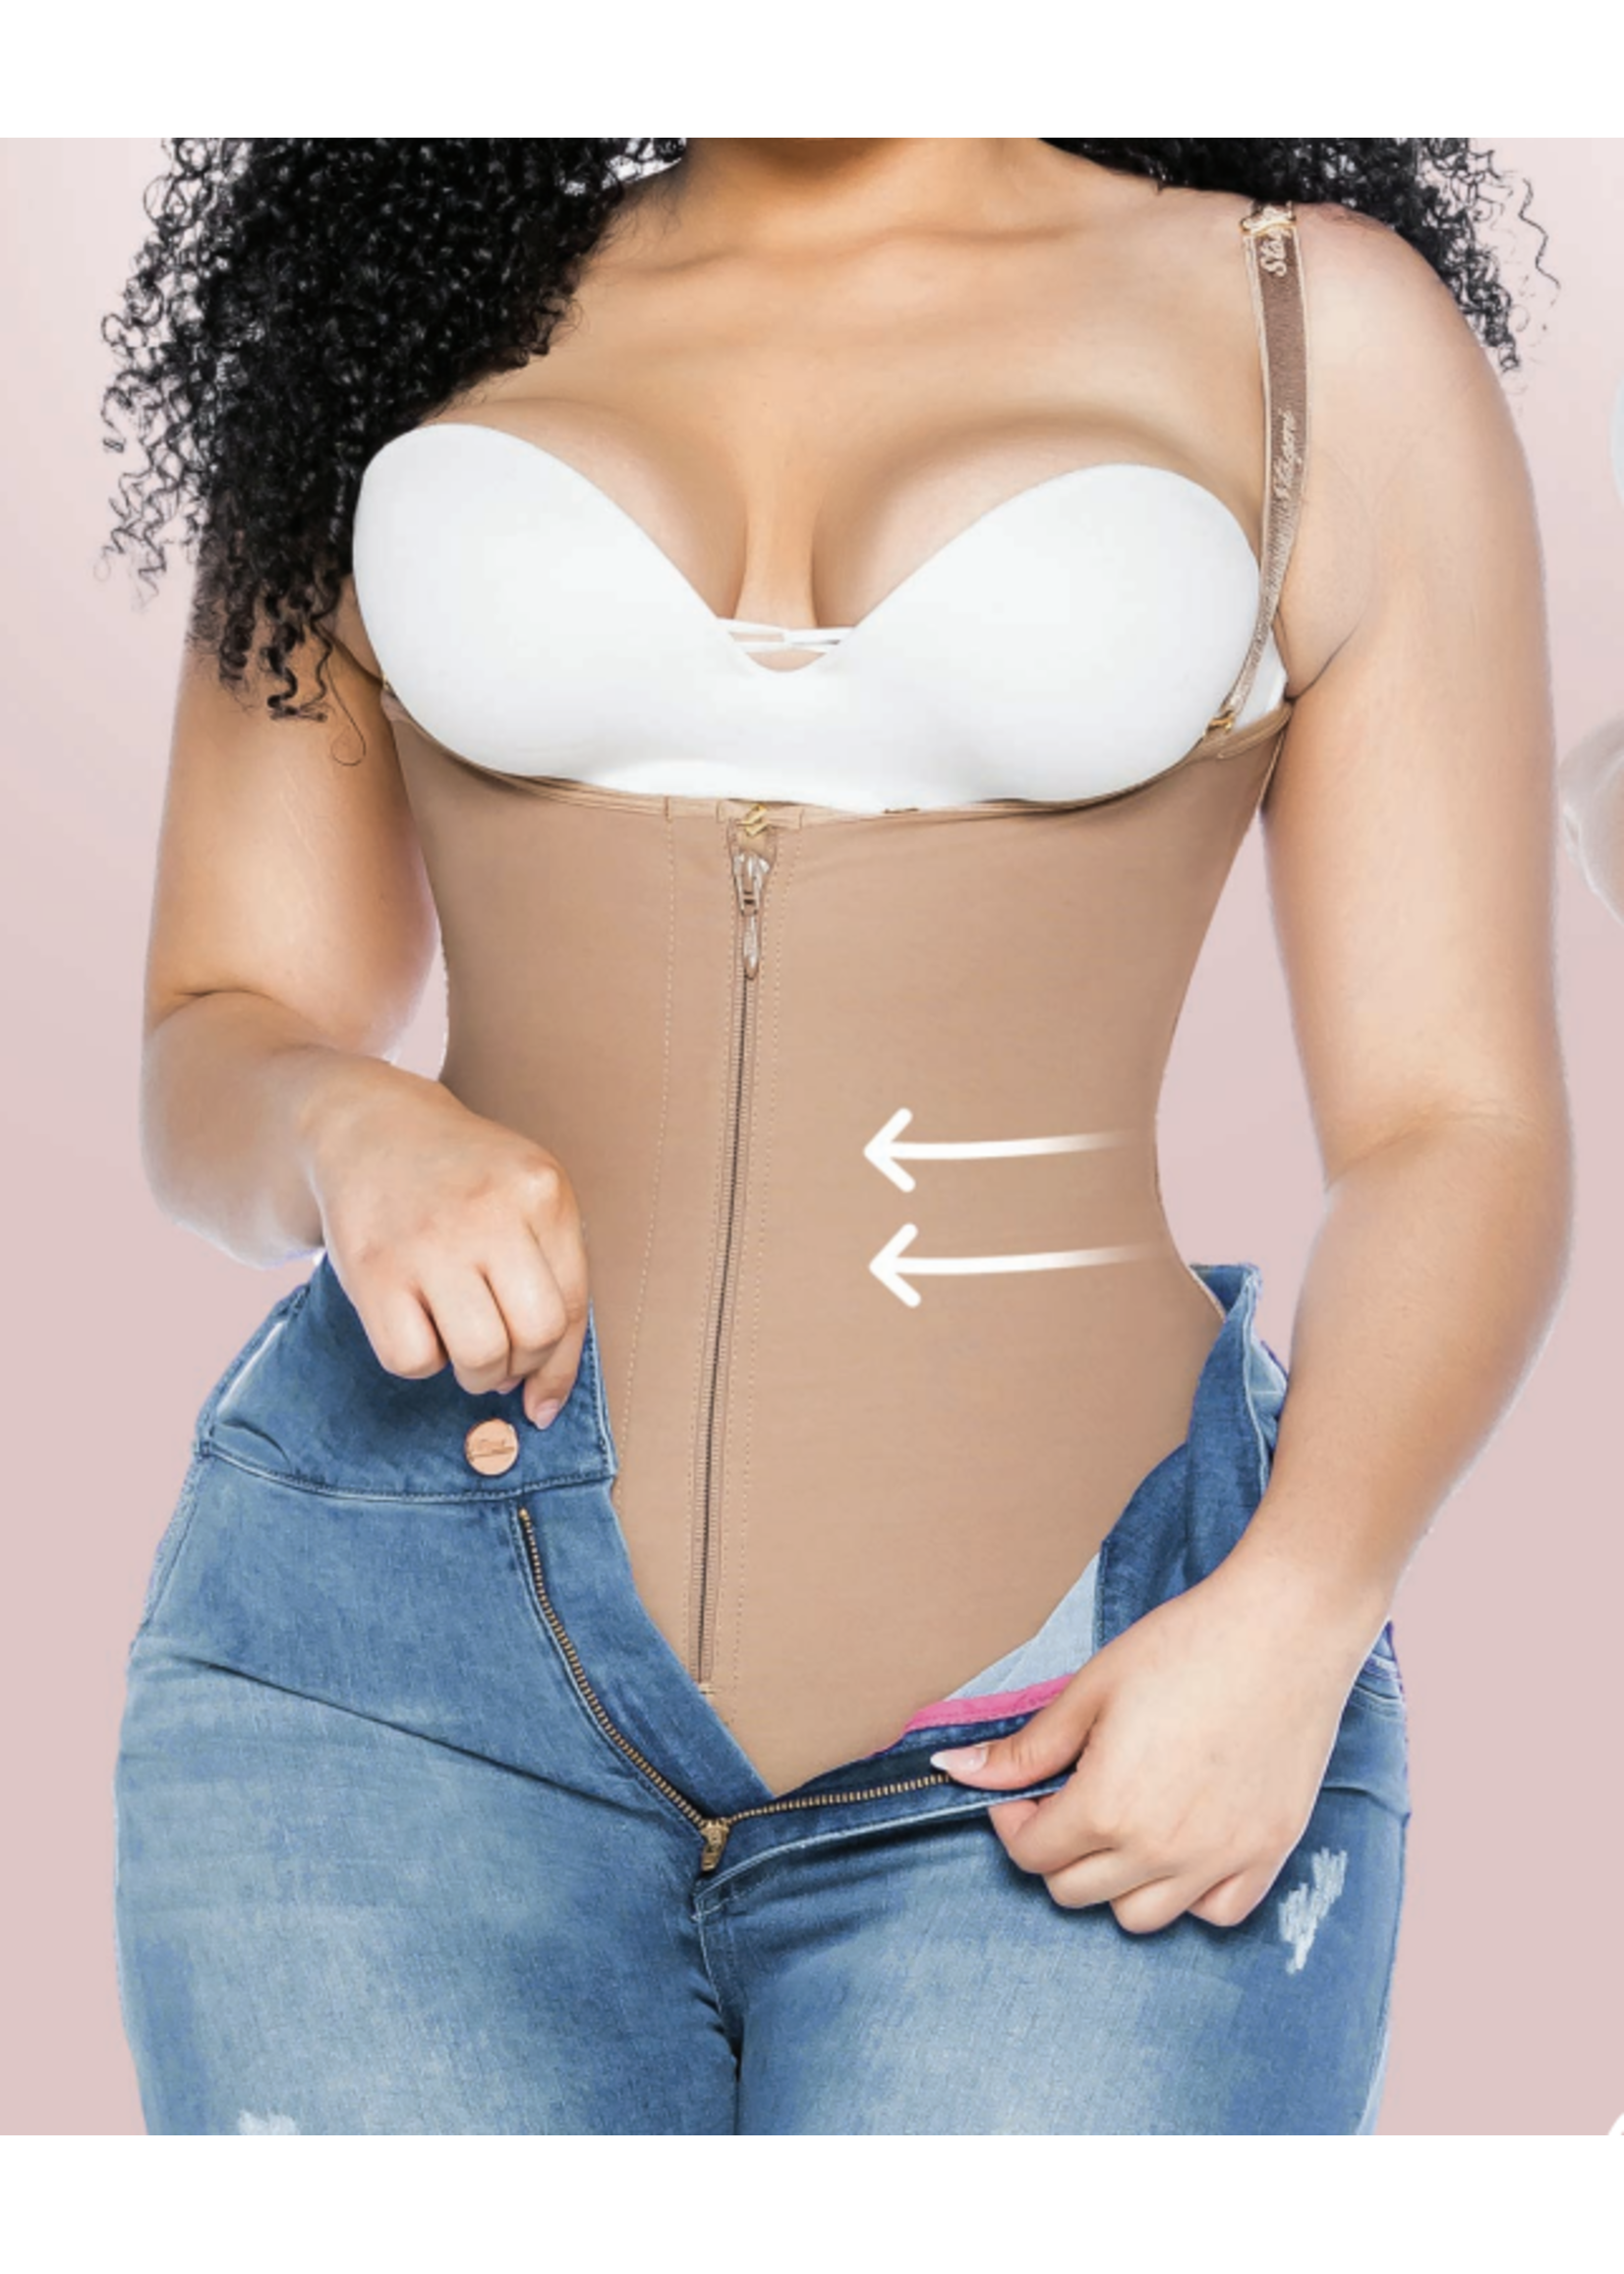 7087 Faja-  Realce Natural *NO RETURNS OR EXCHANGES*